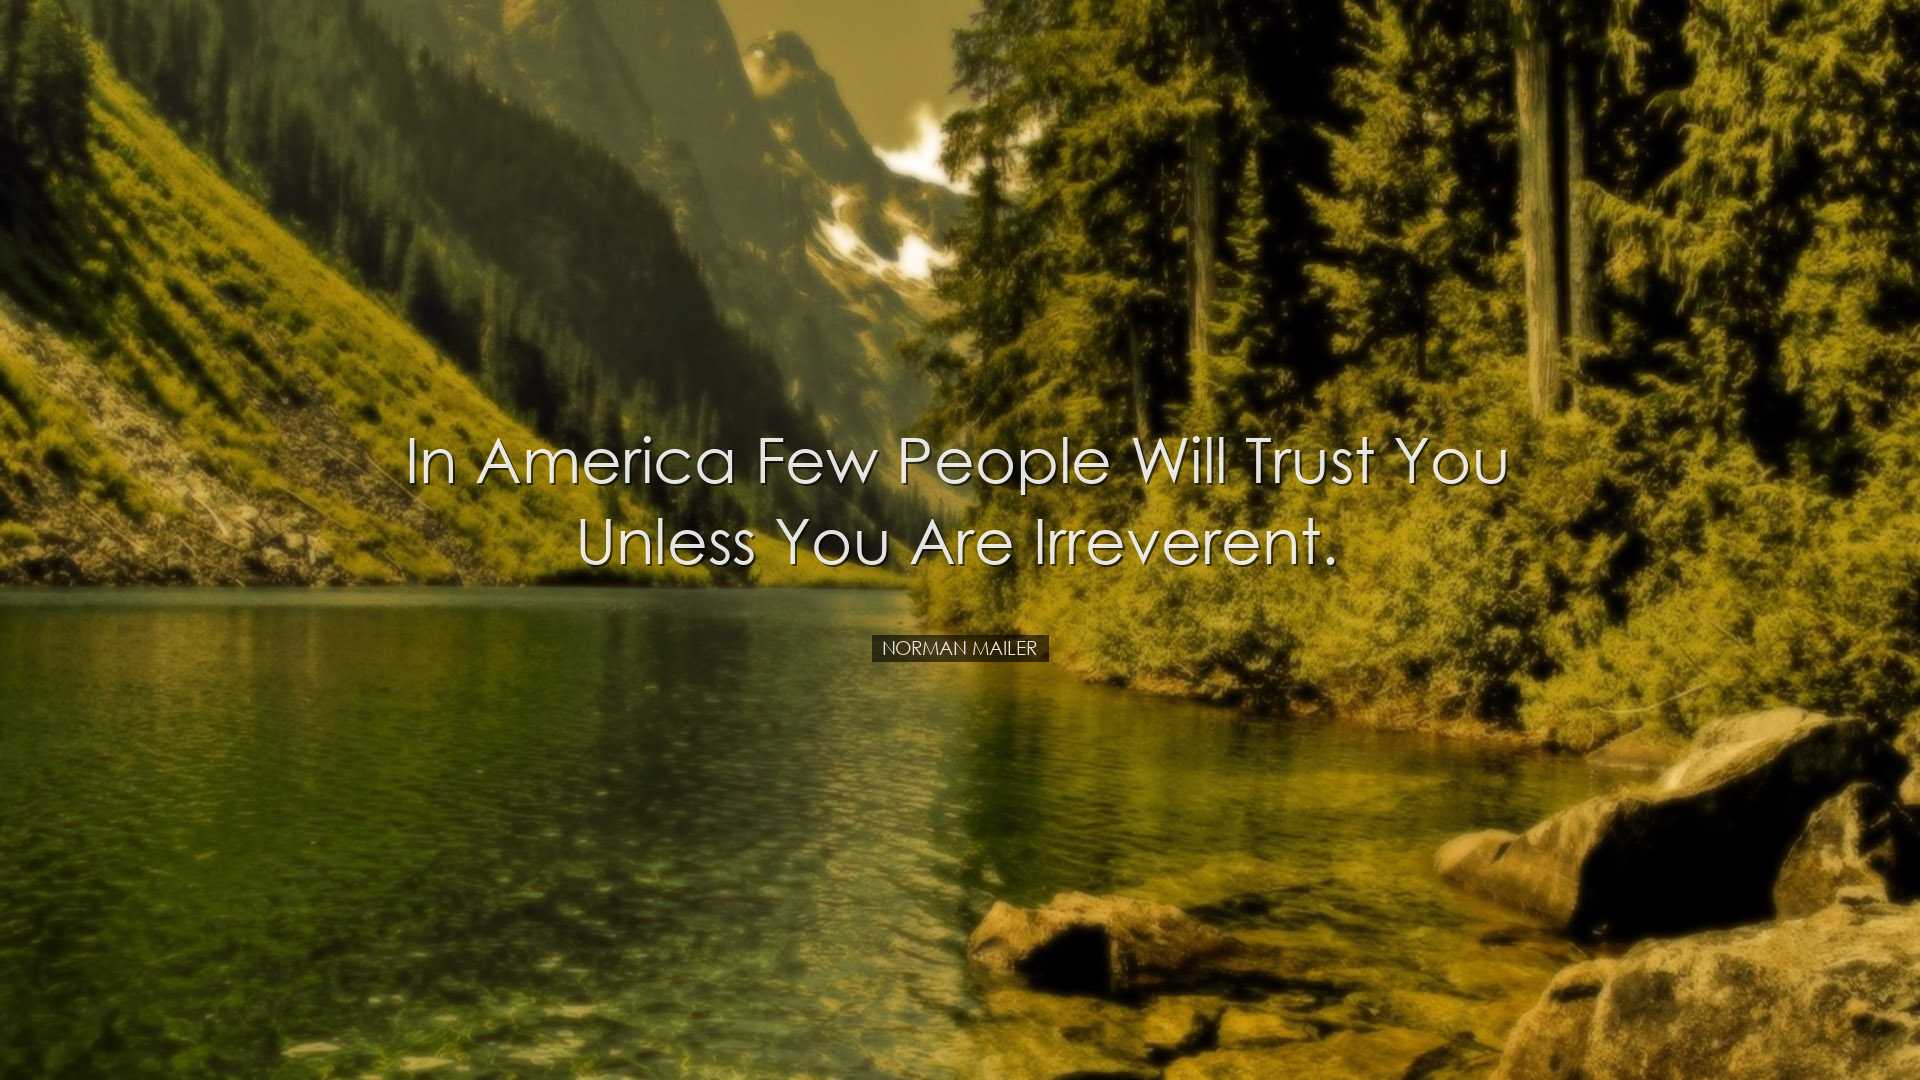 In America few people will trust you unless you are irreverent. -